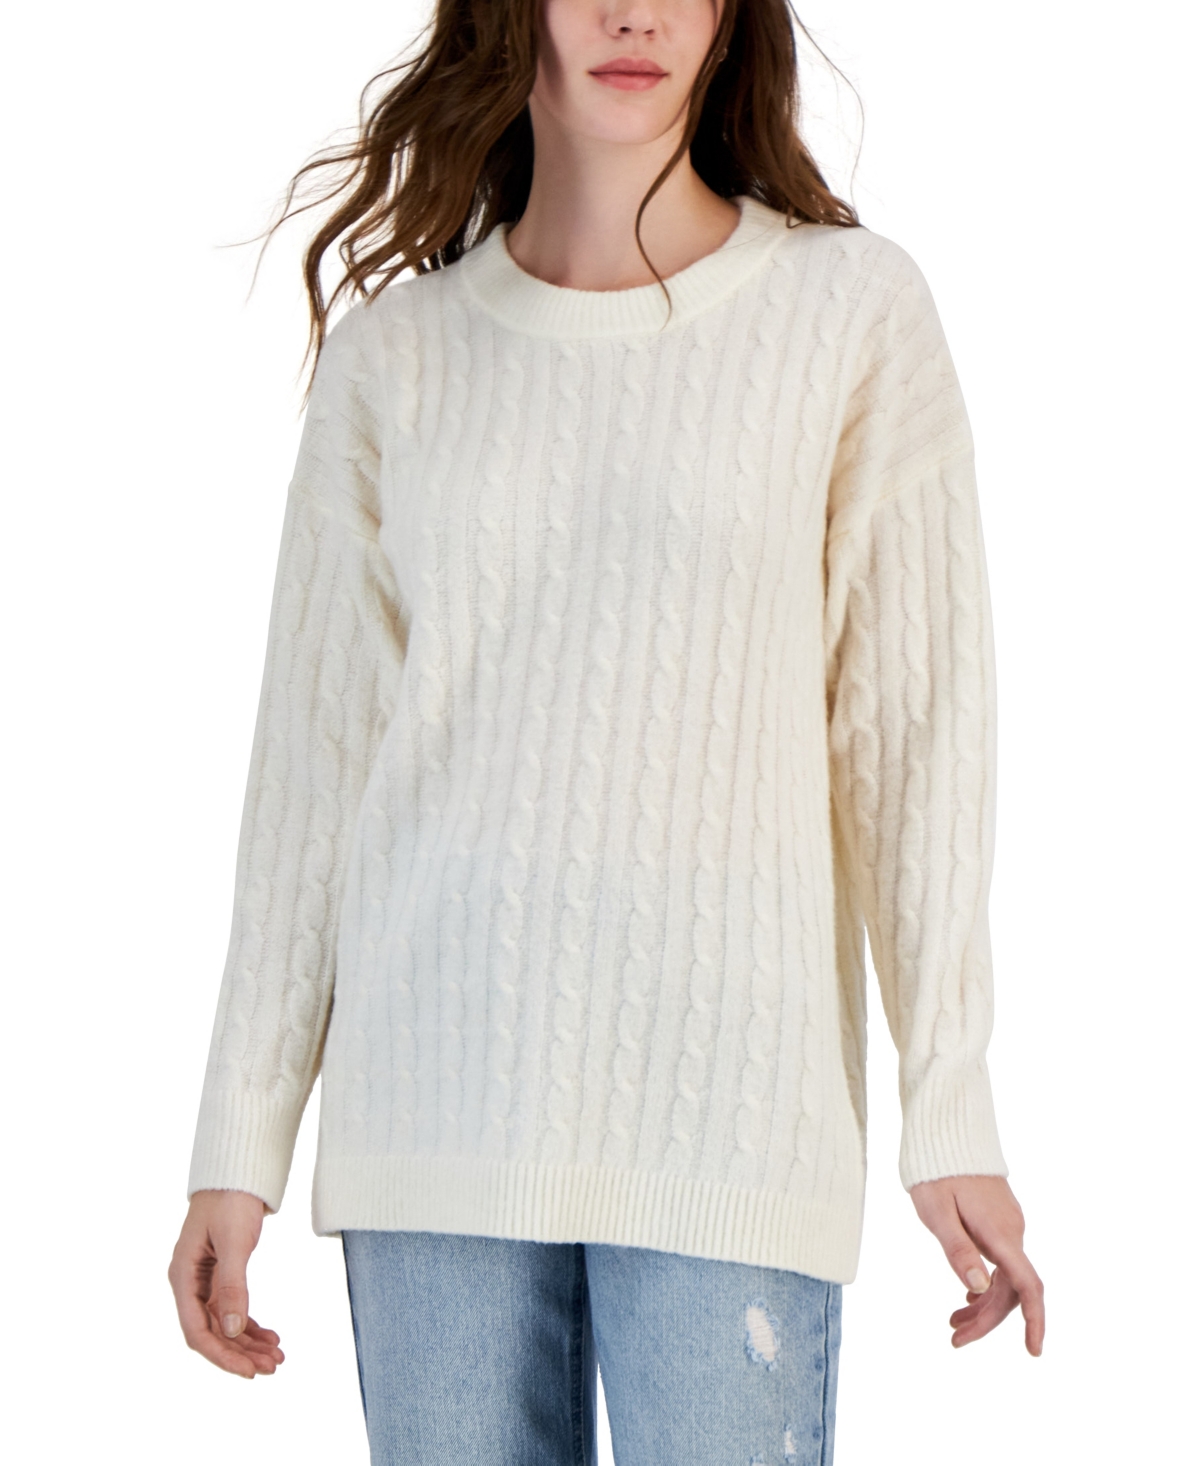 Hippie Rose Juniors' Cable-knit Crewneck Tunic Sweater In Blizzard White